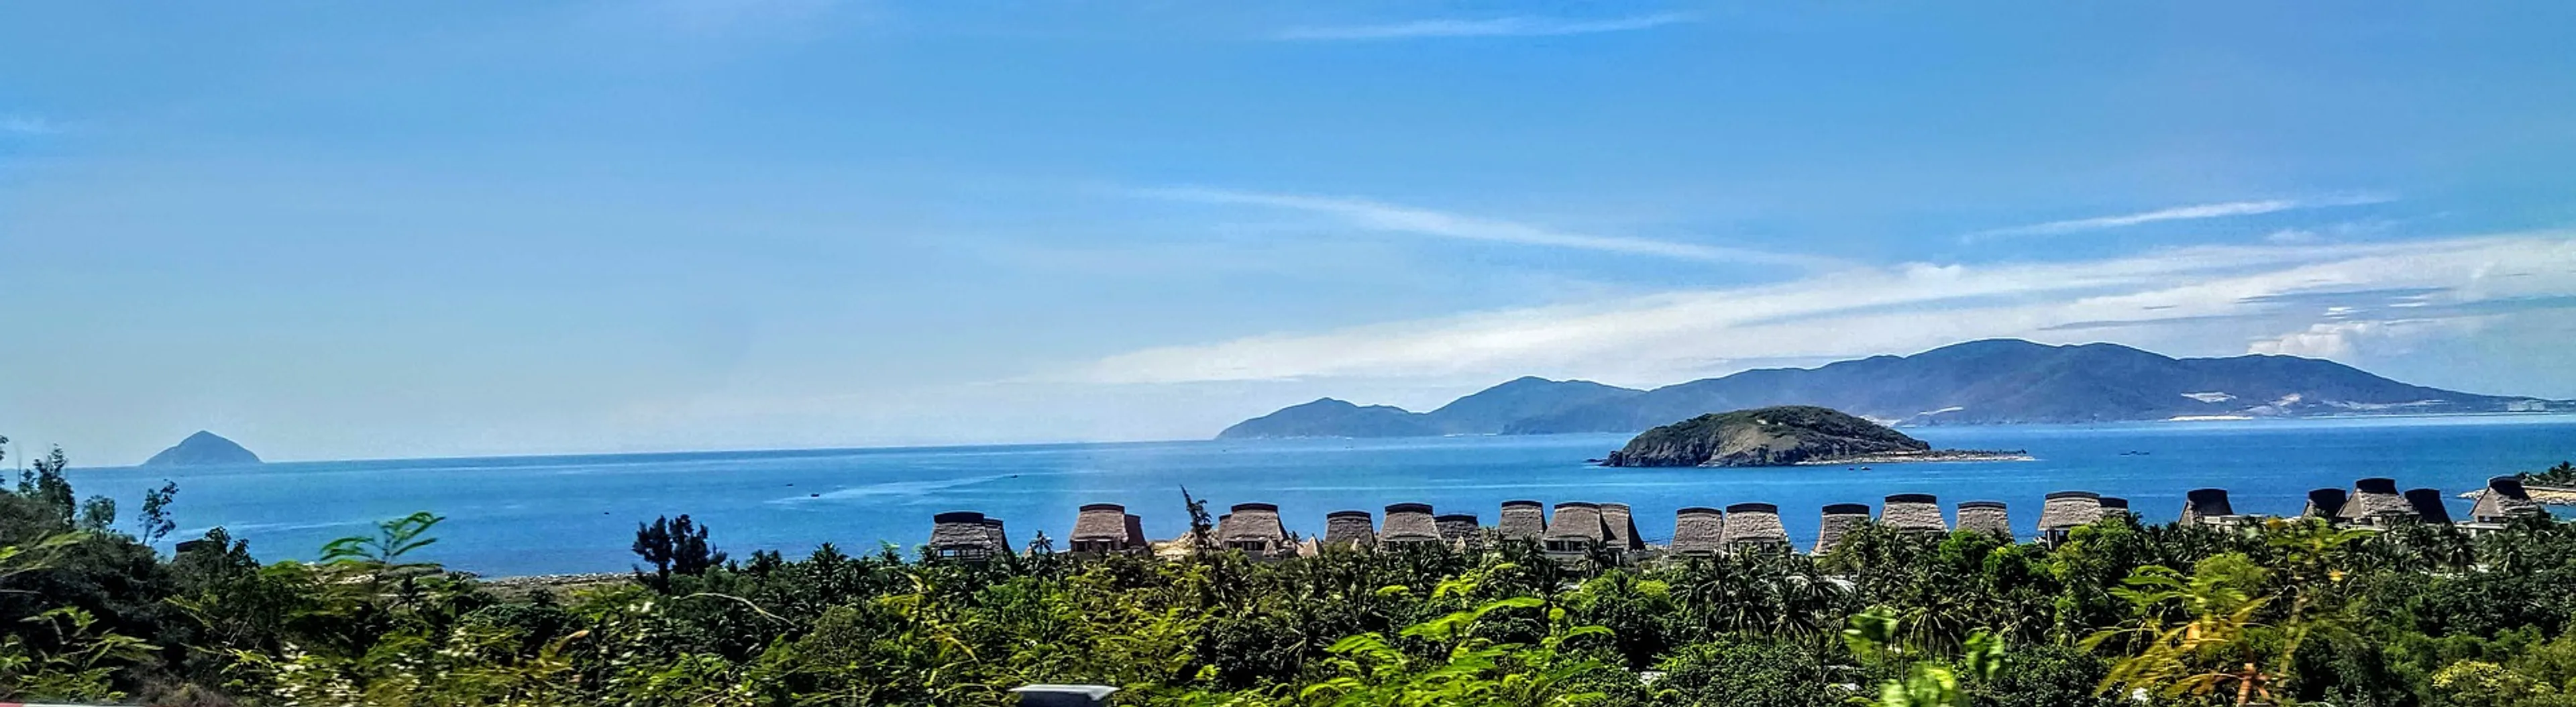 6 Must-See Attractions in Nha Trang